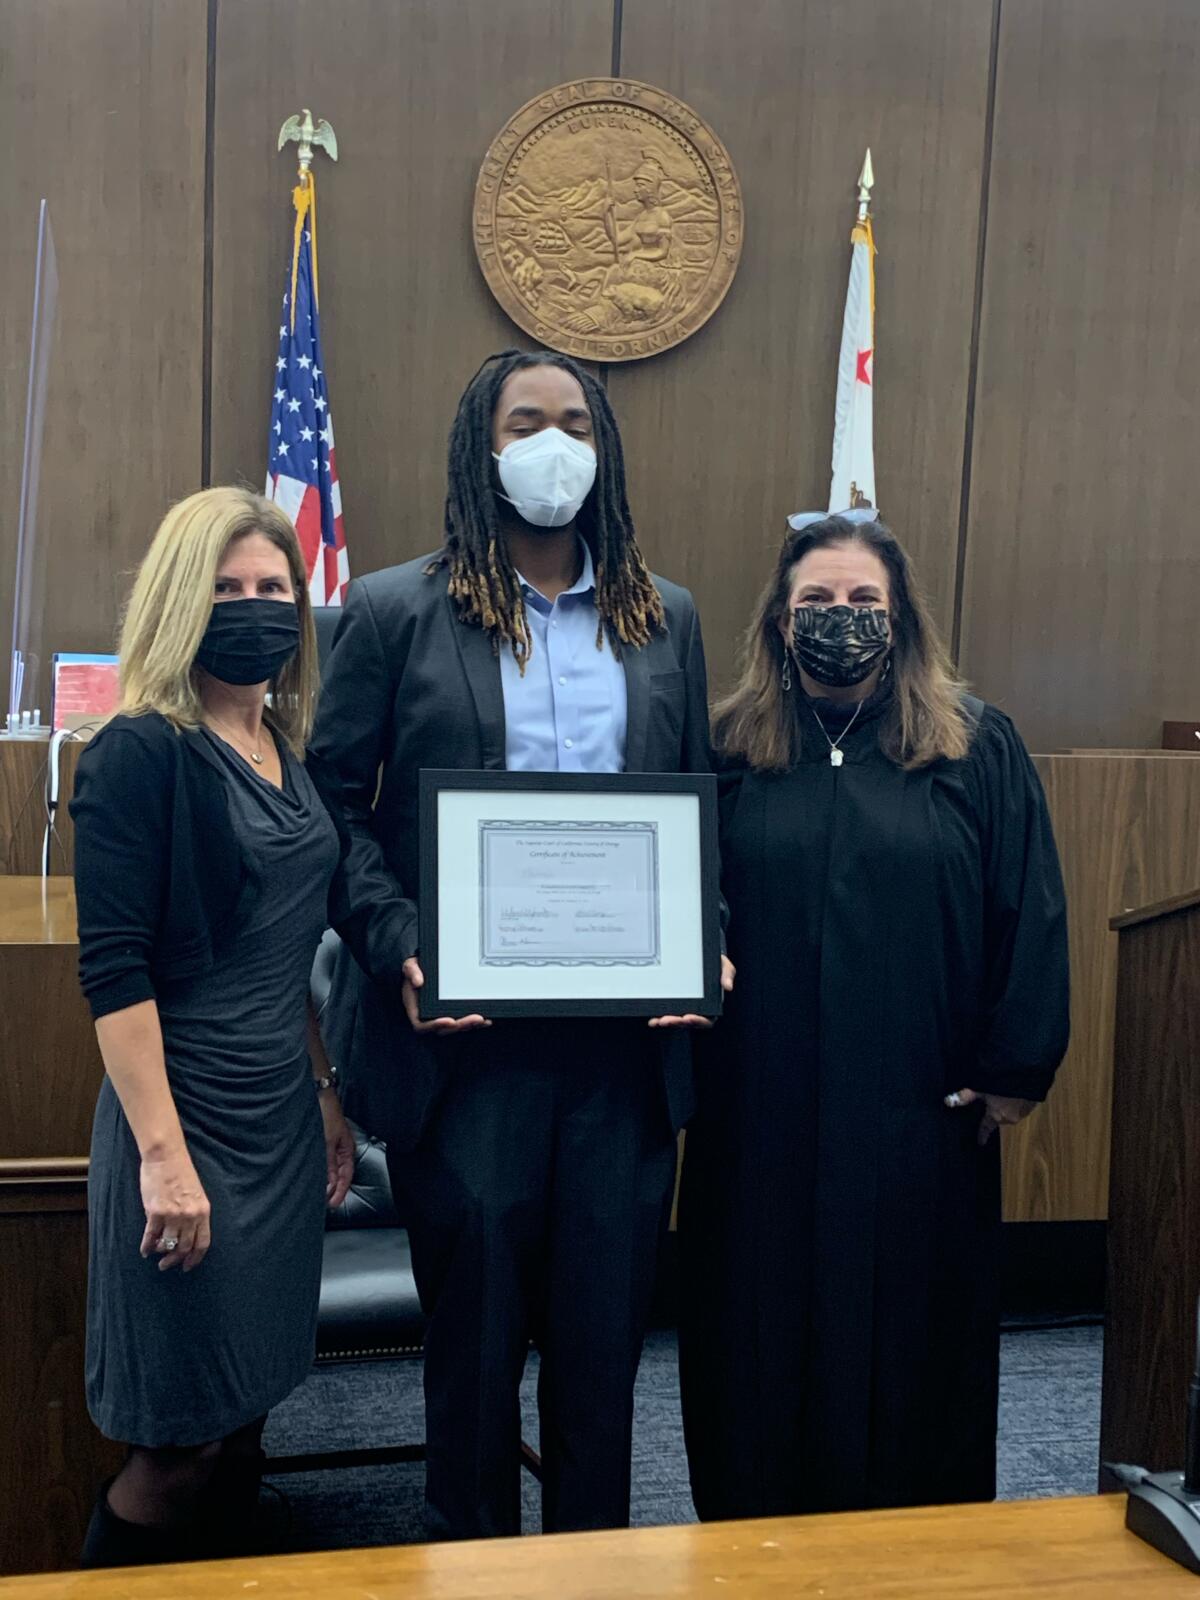 Three people pose in a courtroom with a framed certificate